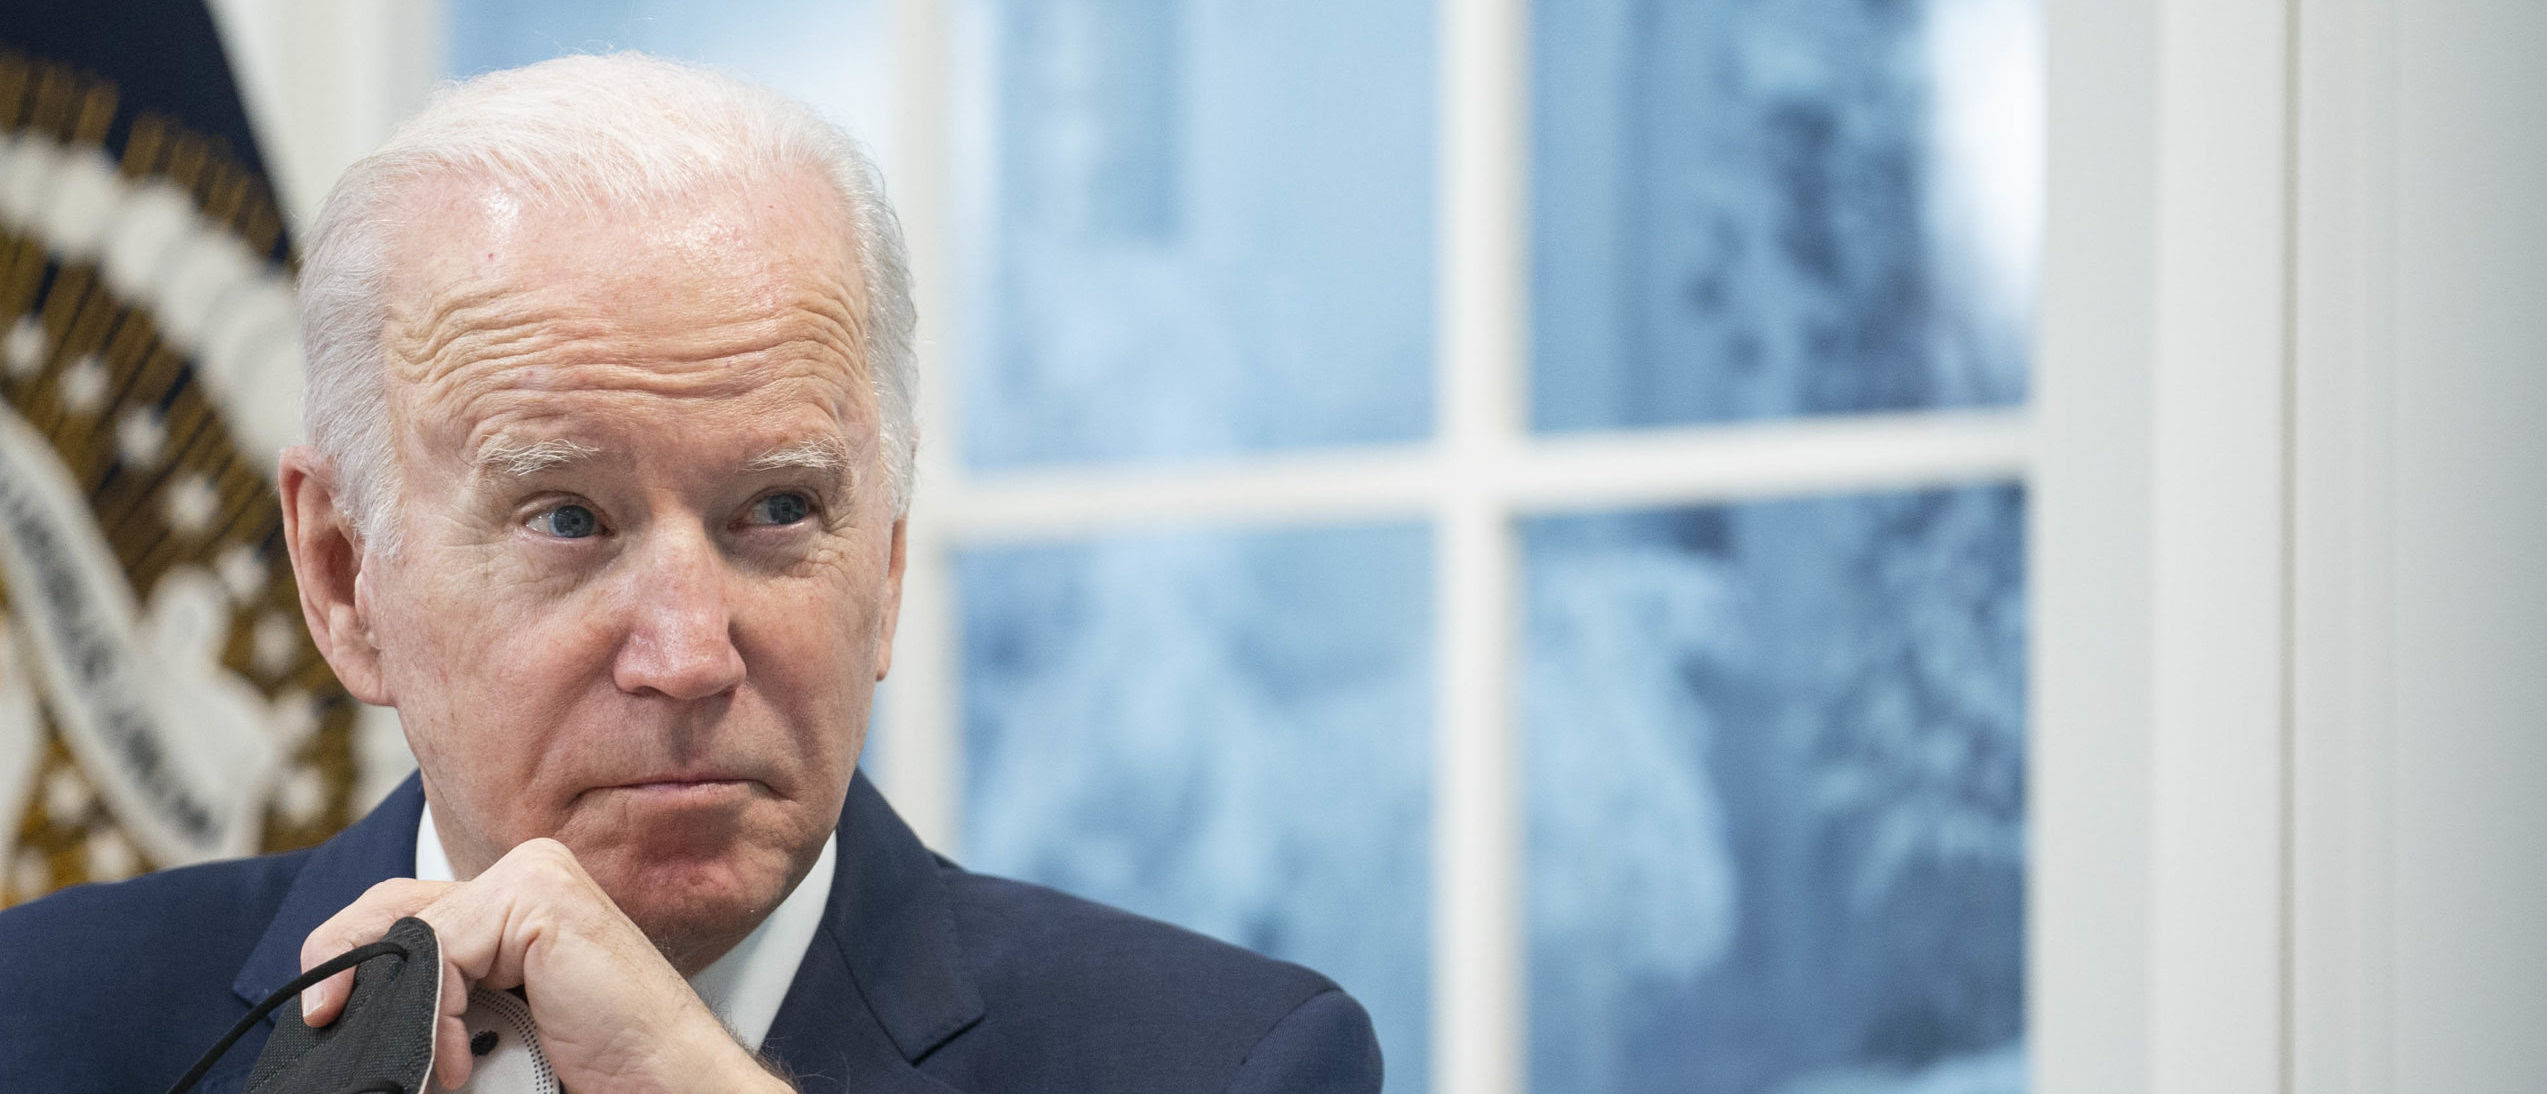 Biden Administration Allocates $1 Billion For Meat And Poultry Industry Amid Soaring Consumer Prices